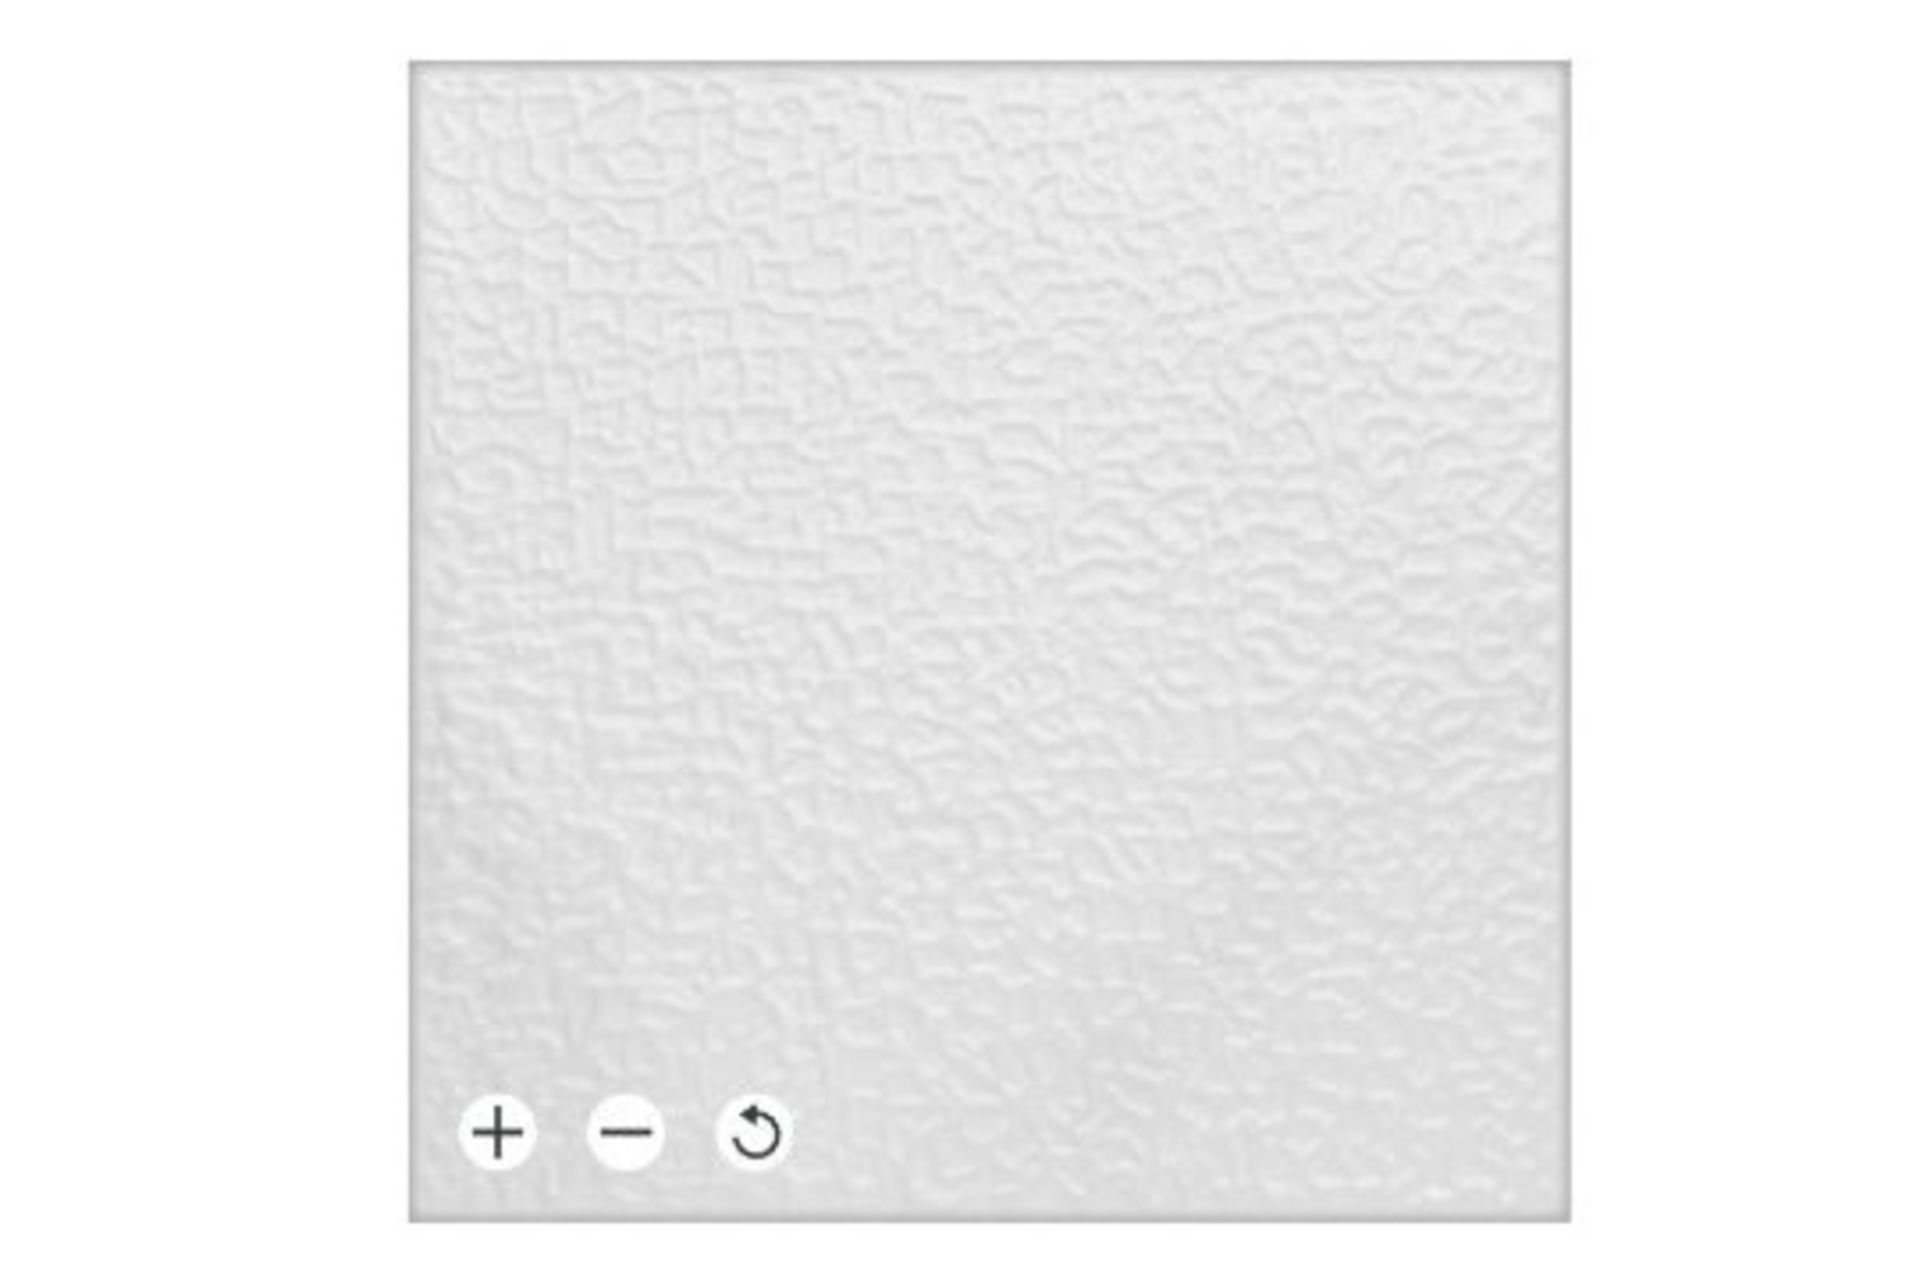 White 1: Decorative Ceiling and Wall Panels 2m2 (21.52 sqft) - 8 Panel. - ER45. Aesthetics: